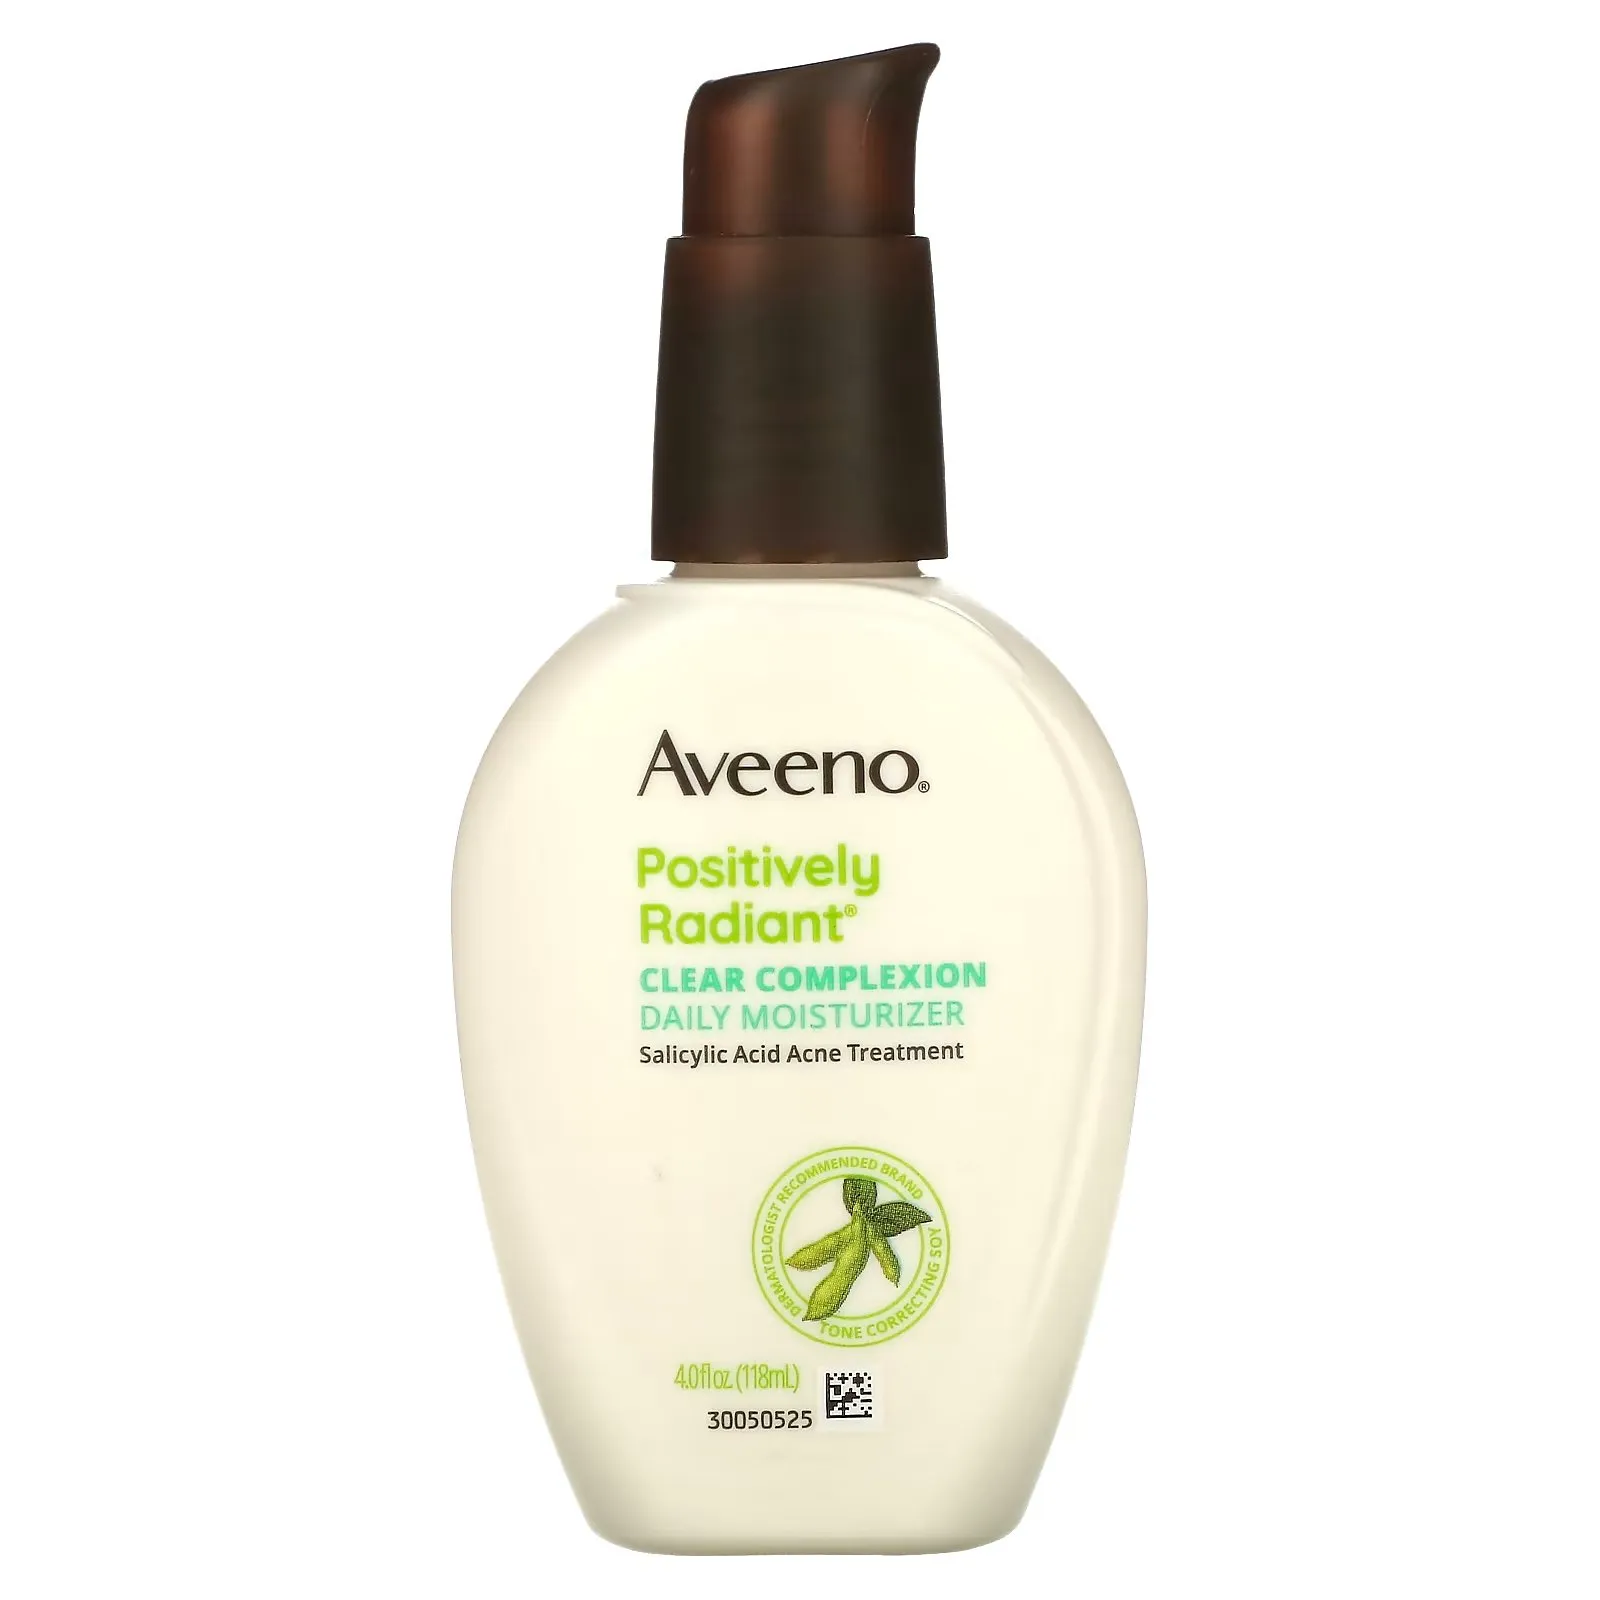 FEMMENORDIC's choice in Aveeno Positively Radiant vs Clear Complexion moisturizer comparison, Aveeno Clear Complexion Daily Moisturizer